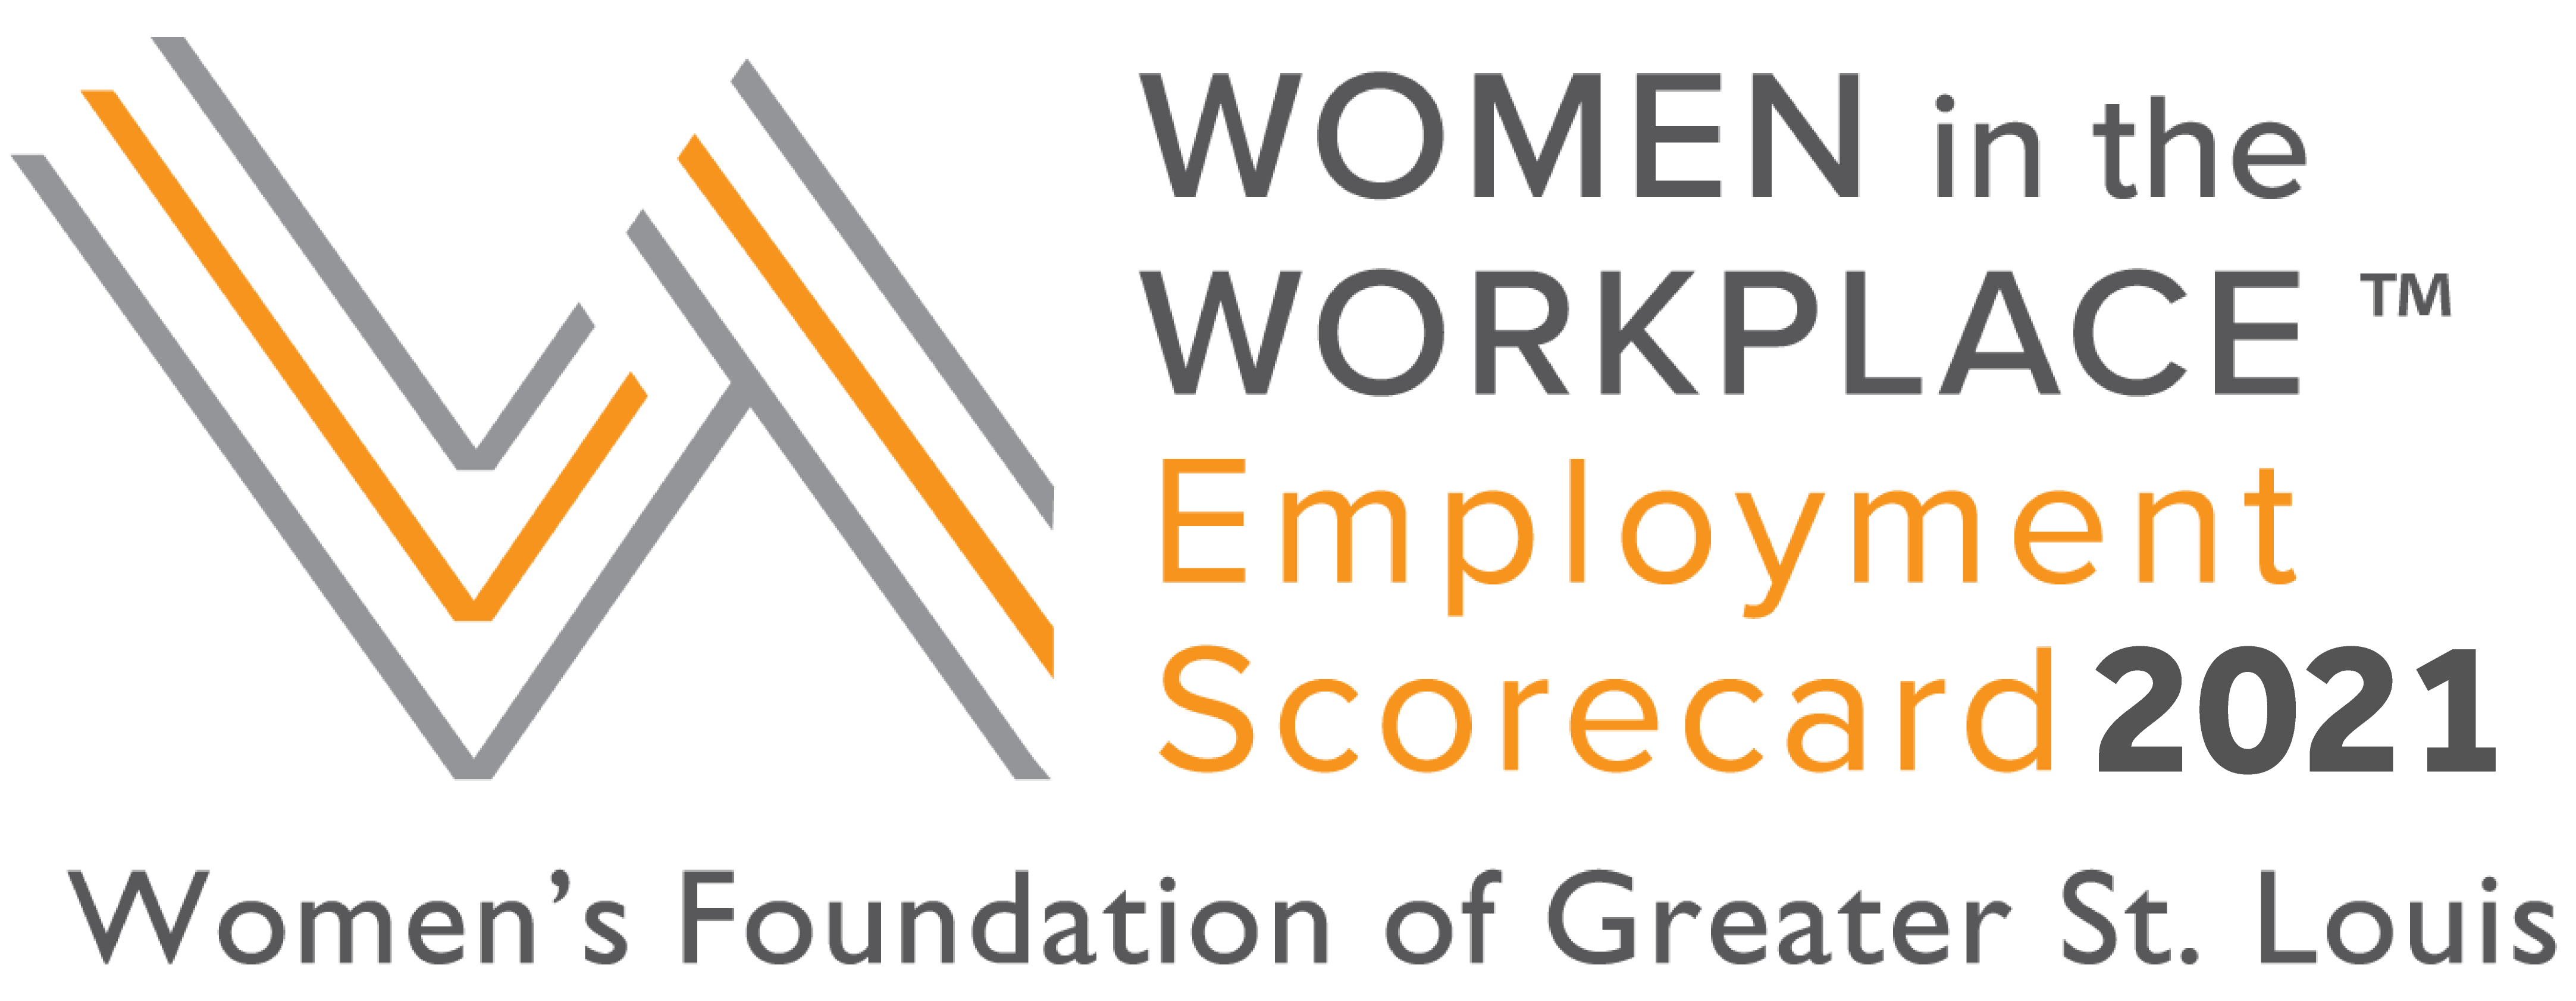 Logo with grey and orange diagonal lines and text "Women in the Workplace Employment Scorecard 2021, Women's Foundation of Greater St. Louis"